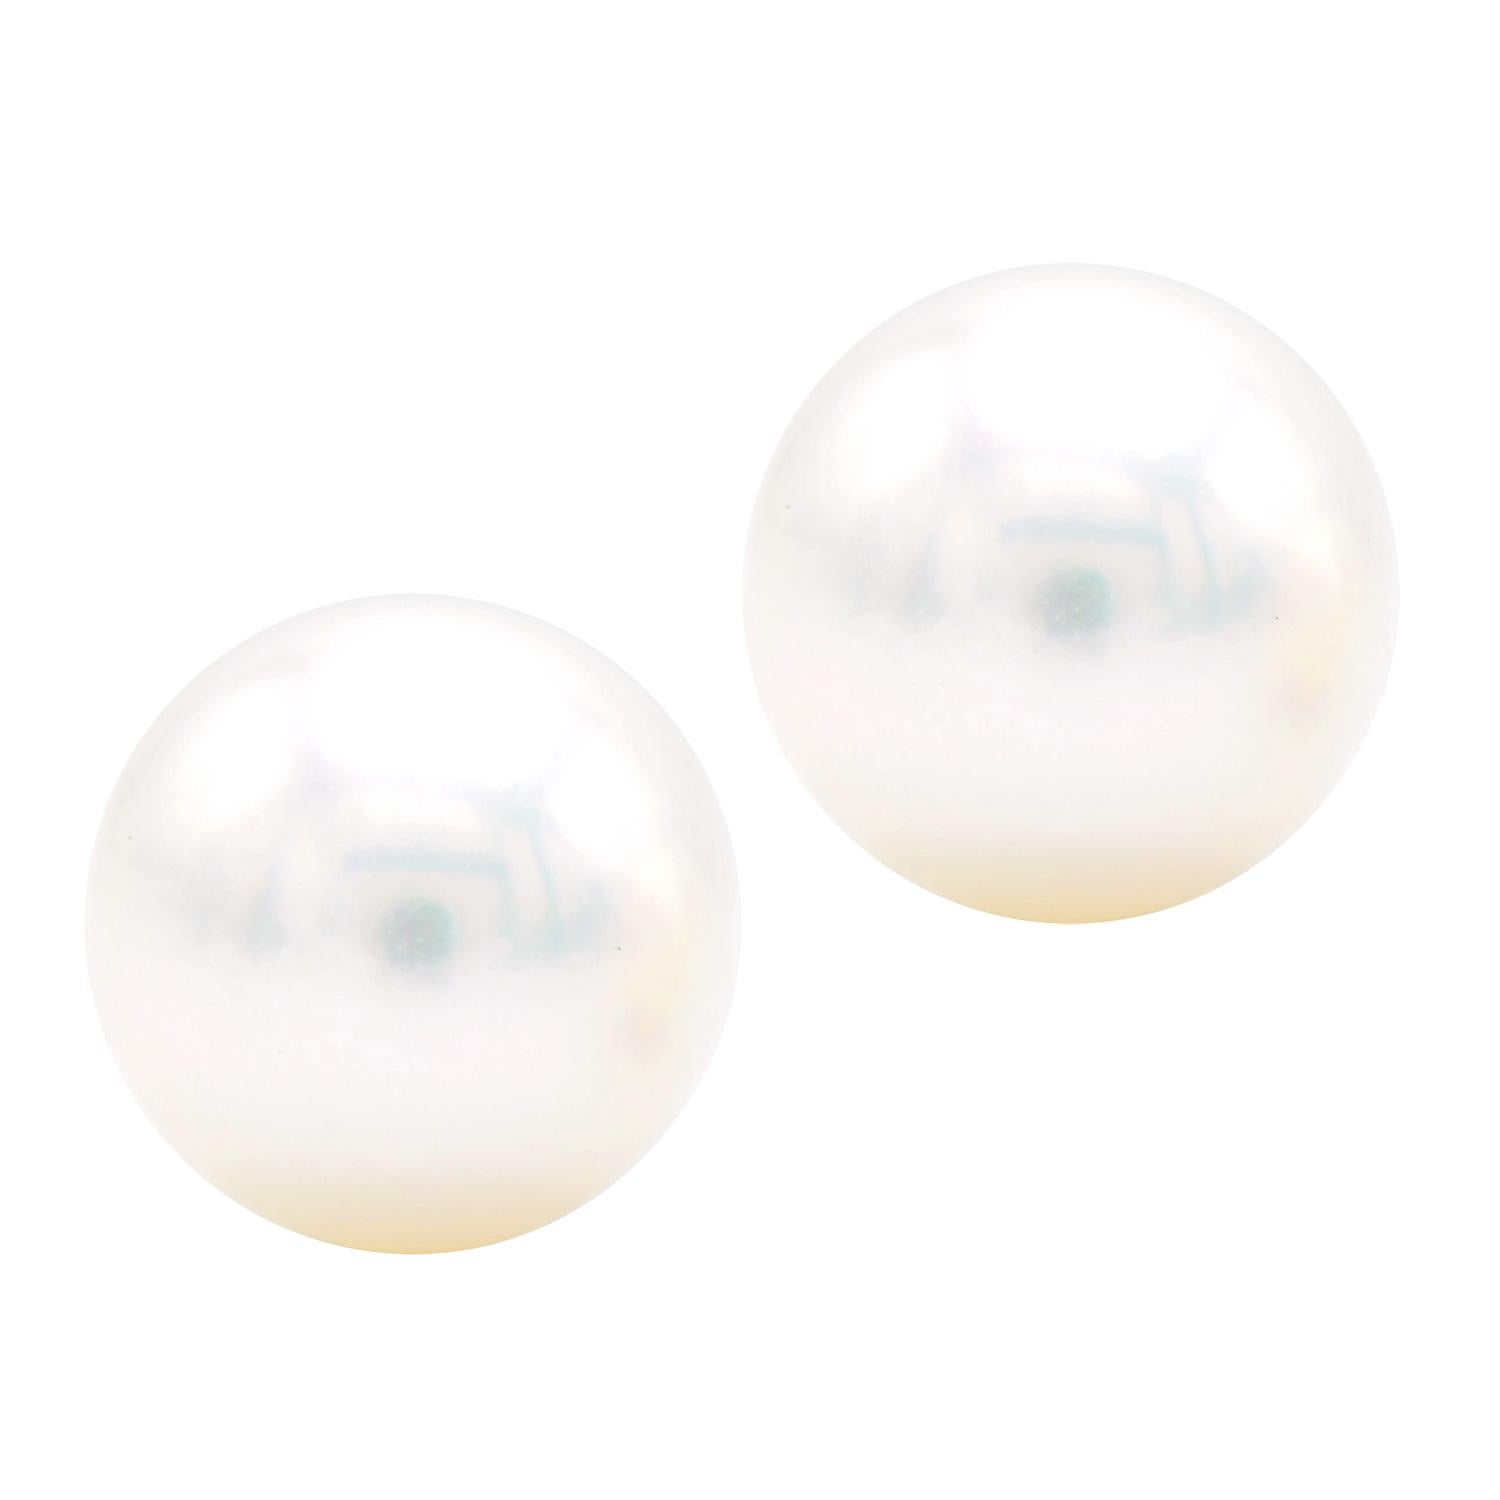 Cultured pearl stud earrings are the most classic and timeless piece of jewelry. They can be worn by anyone and everyone and make an excellent gift for all occasions. These 7-7.5mm cultured pearl earrings are perfectly matched and set in 14 karat